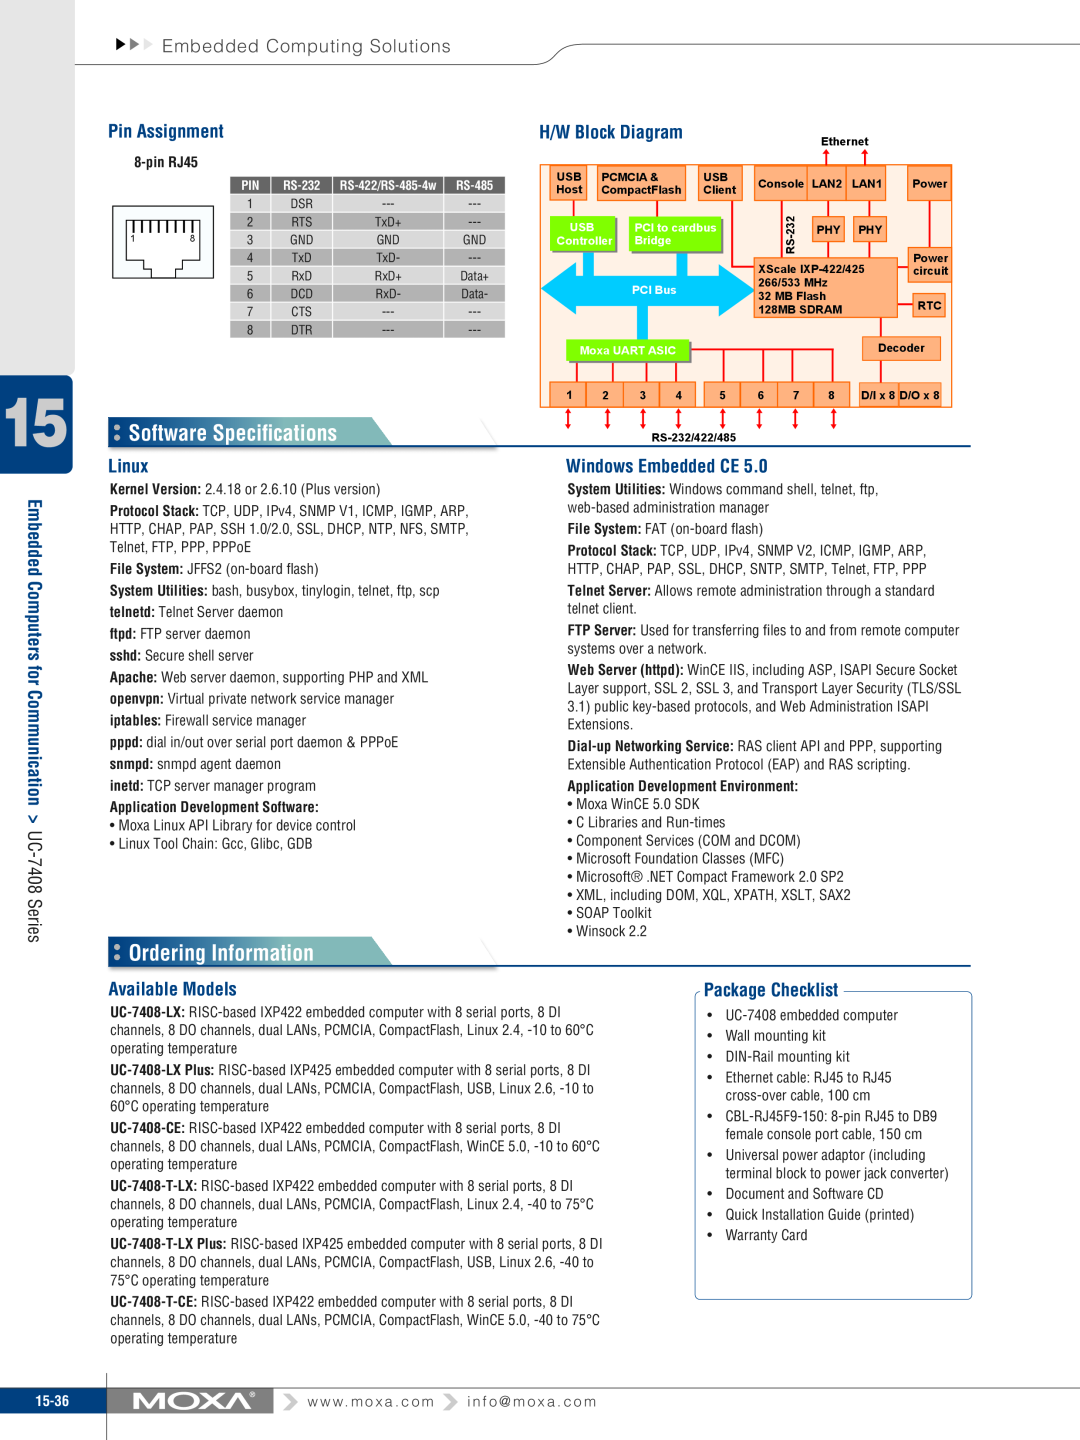 Moxa Technologies UC-7408 Software Speciﬁcations, Ordering Information, Embedded Computing Solutions, H/W Block Diagram 